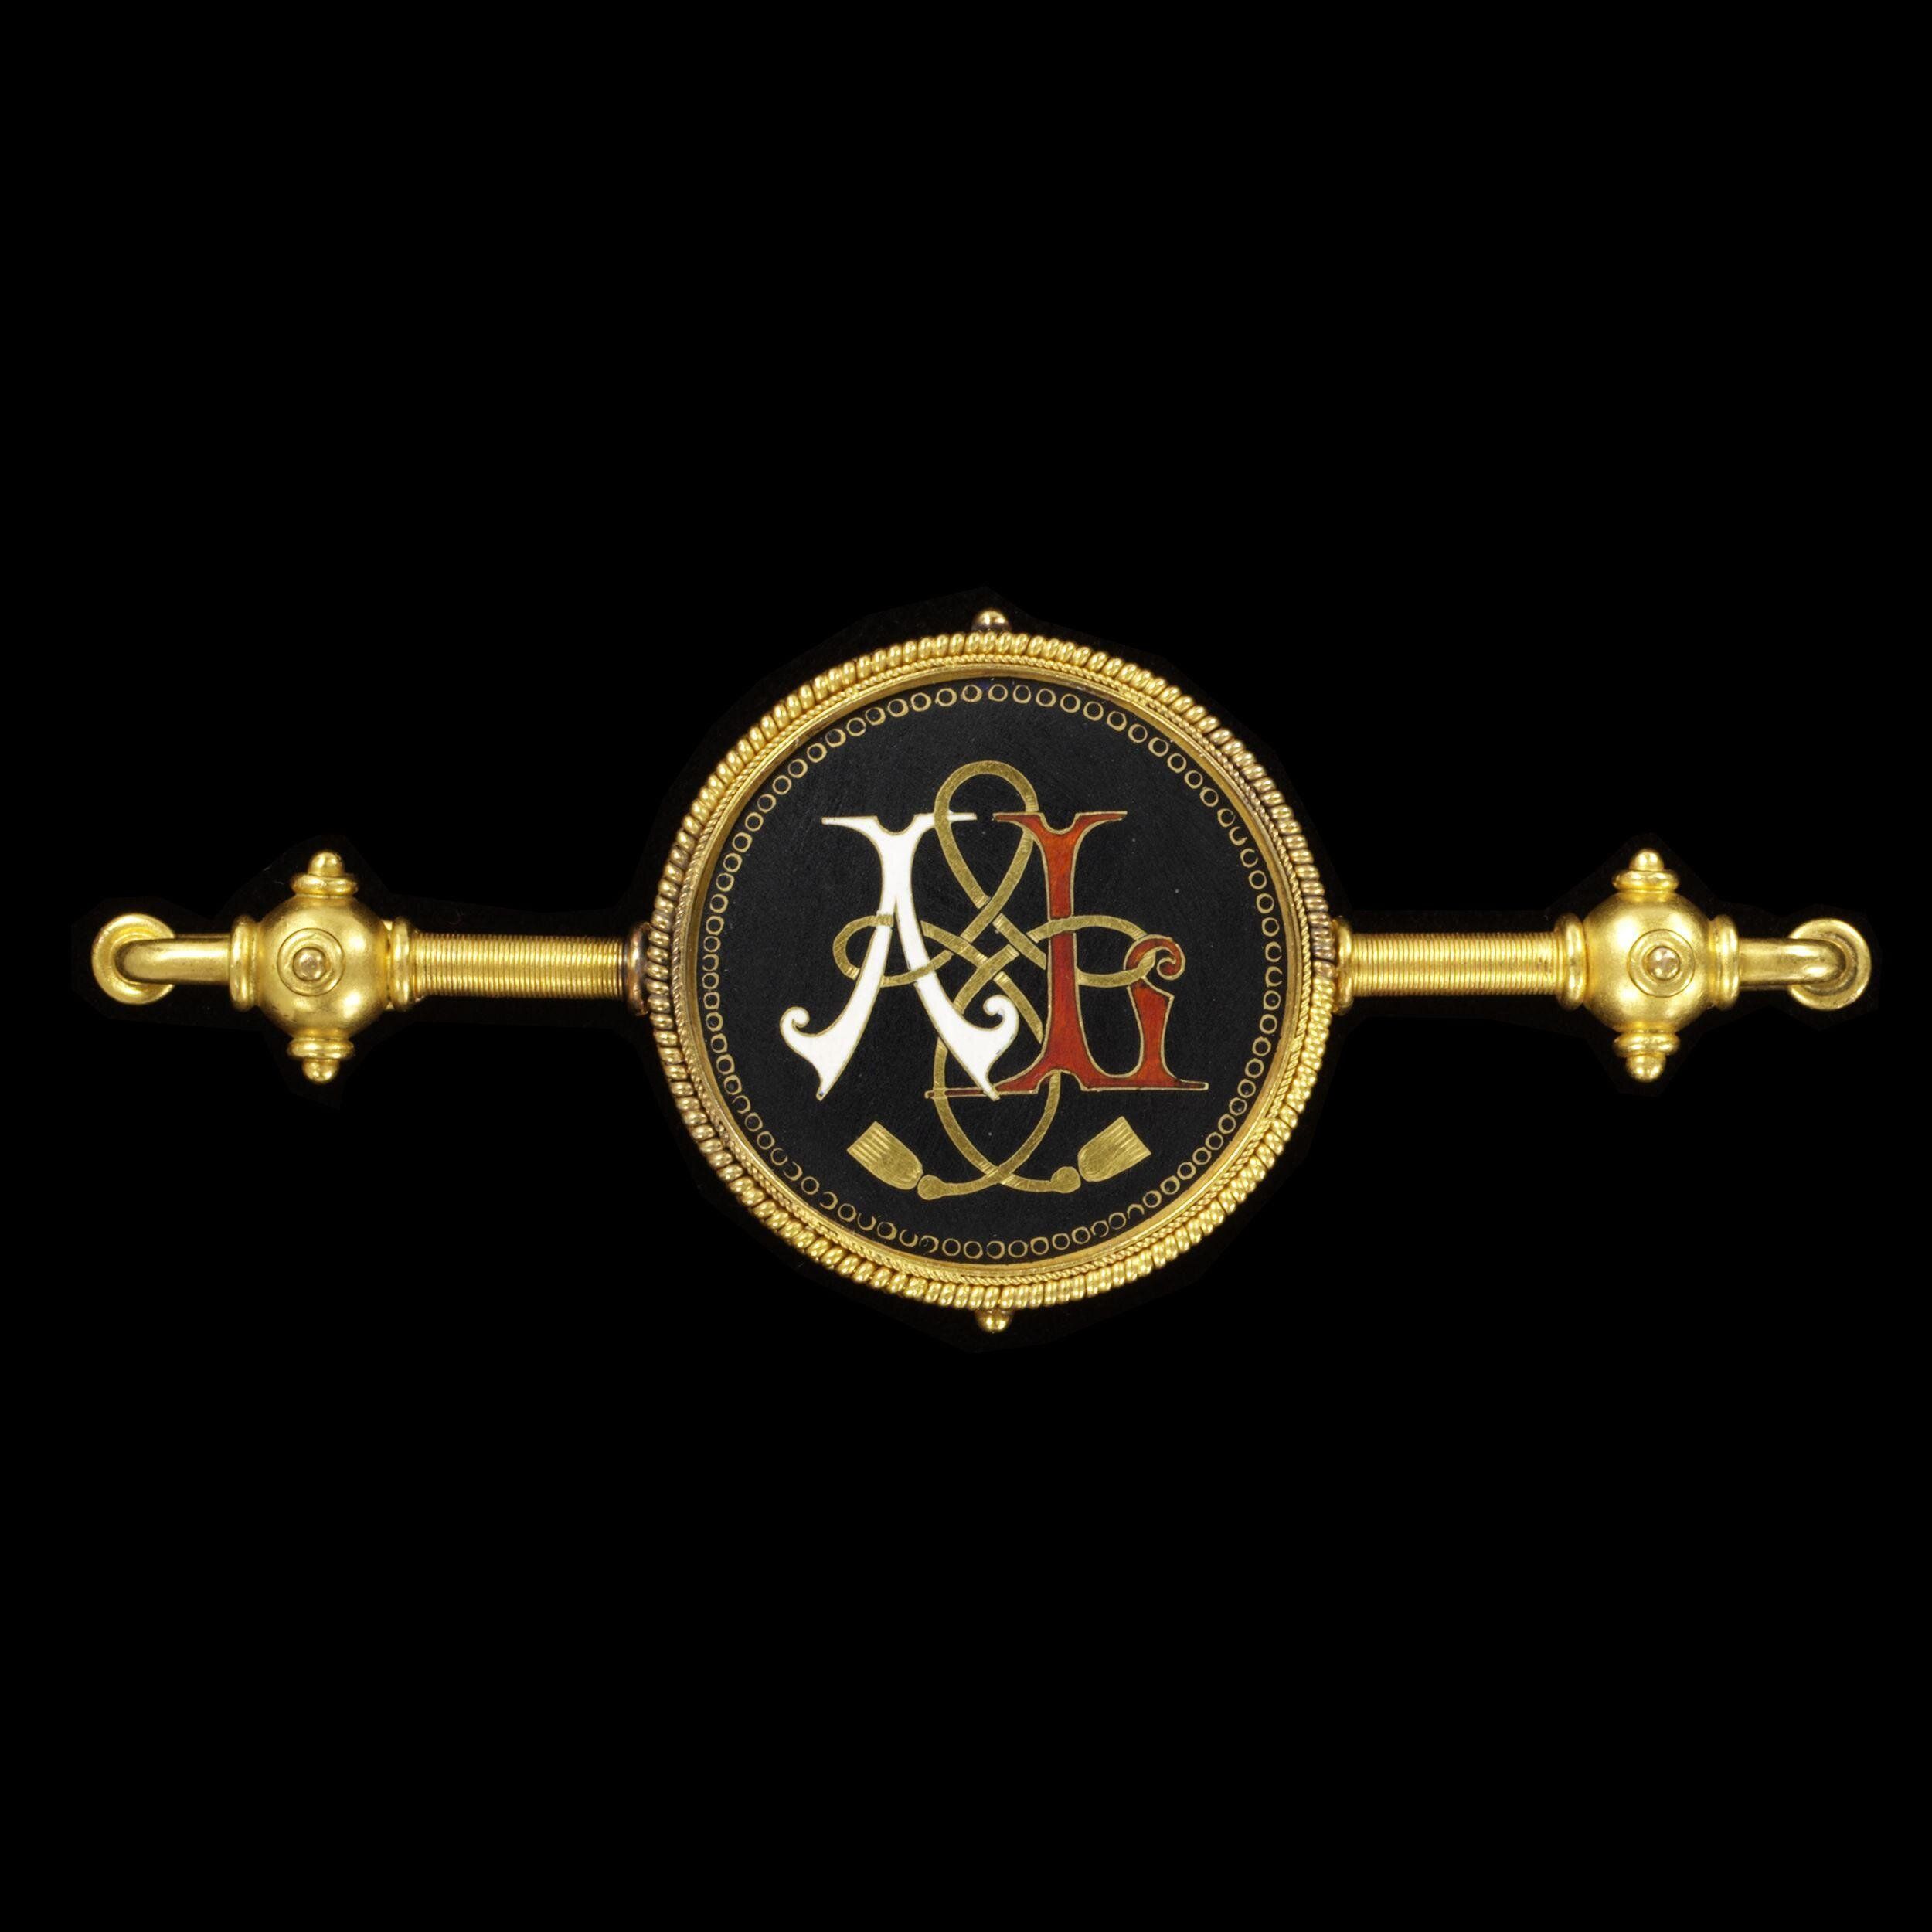 Brooch monogrammed with ‘A’ and ‘L.’ It has a compartment on the reverse containing a lock of hair. It was given to Queen Victoria on her birthday from her daughter Princess Alice and son-in-law Louis of Hesse, 1873 made by Castellani, The Victoria and Albert Museum.